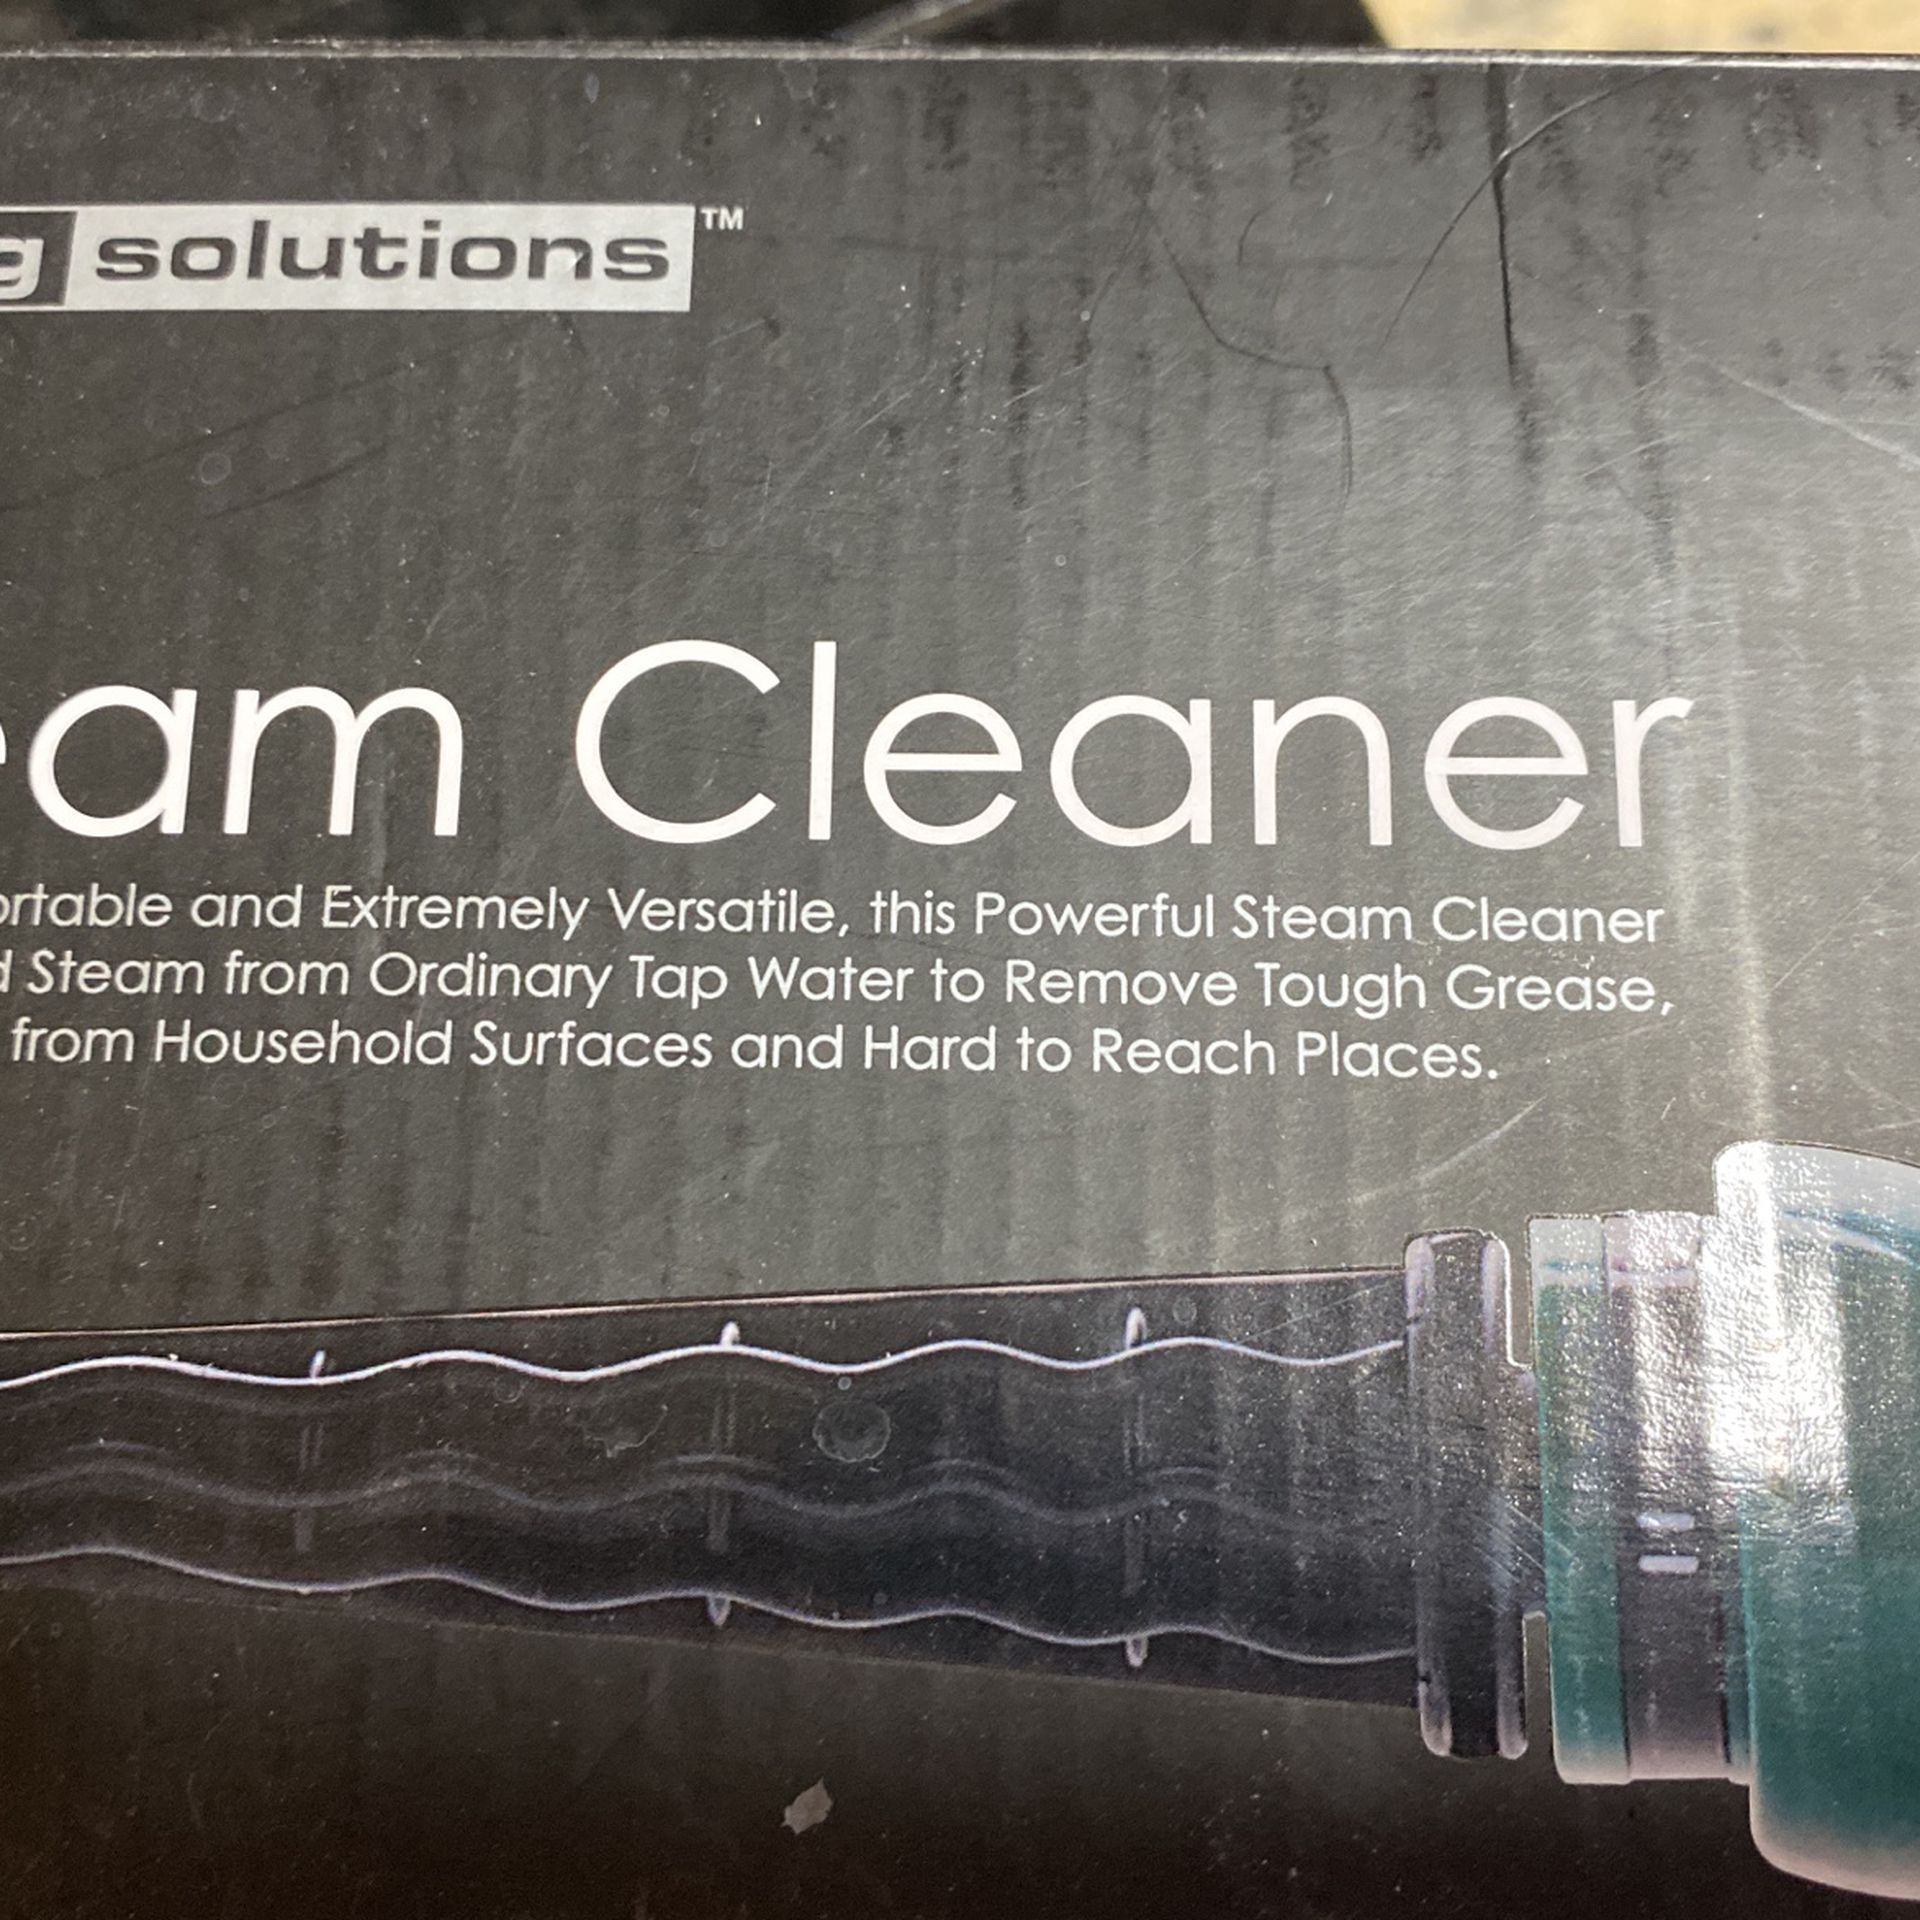 Living Solutions Steam Cleaner